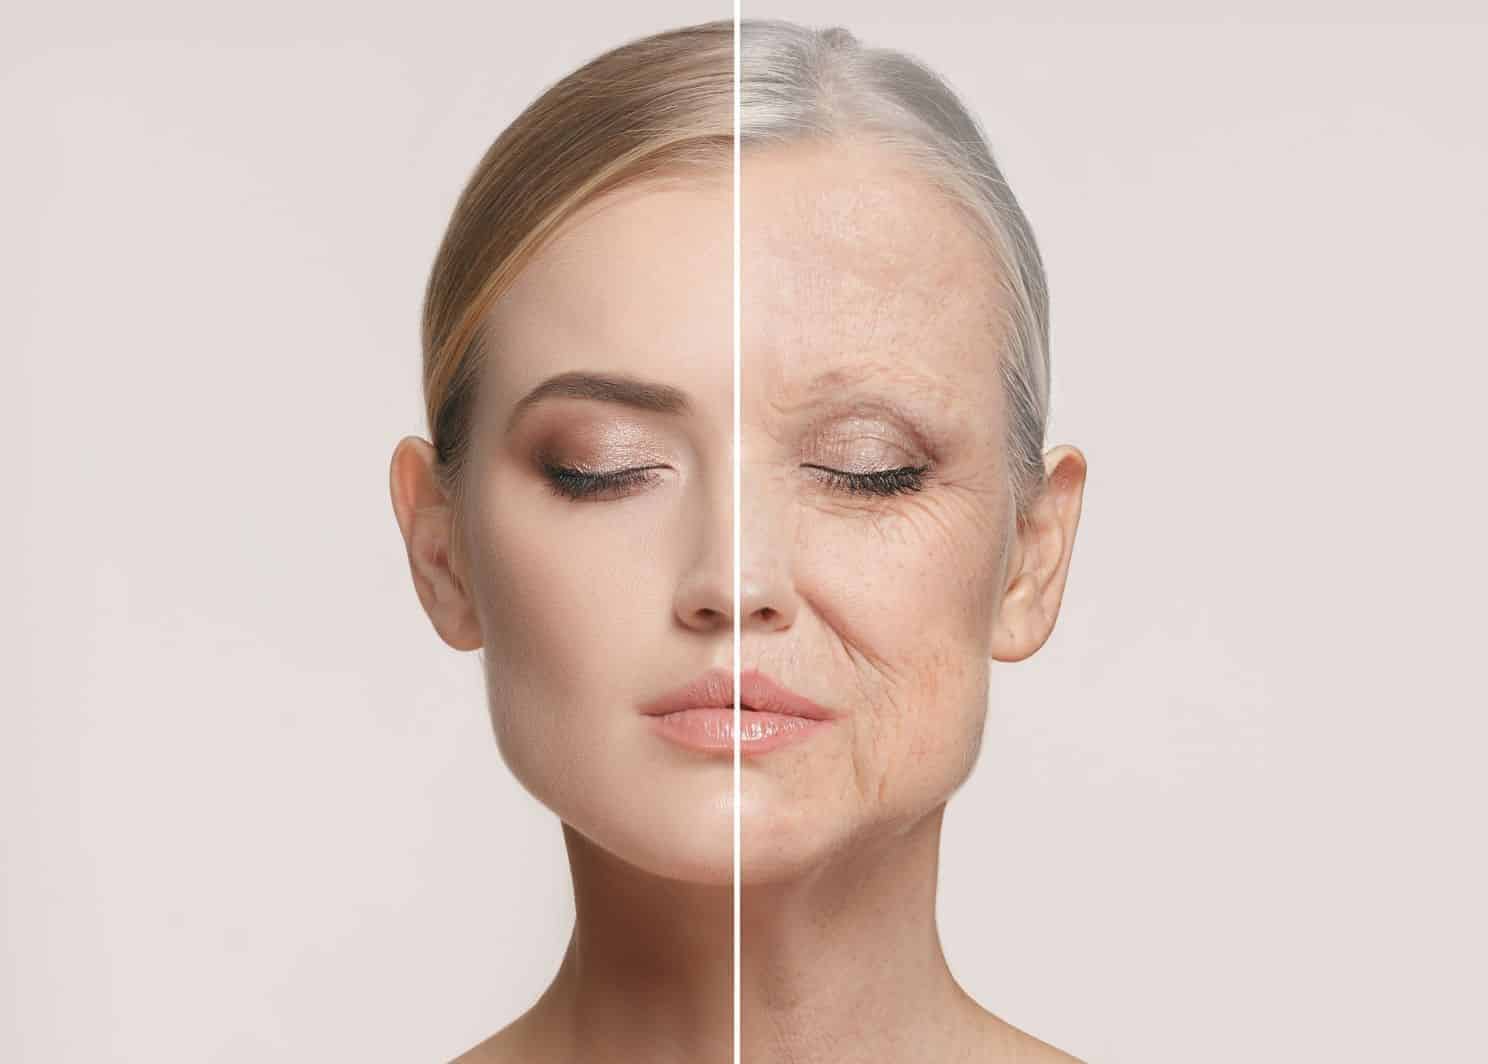 side by side old and new skin health image